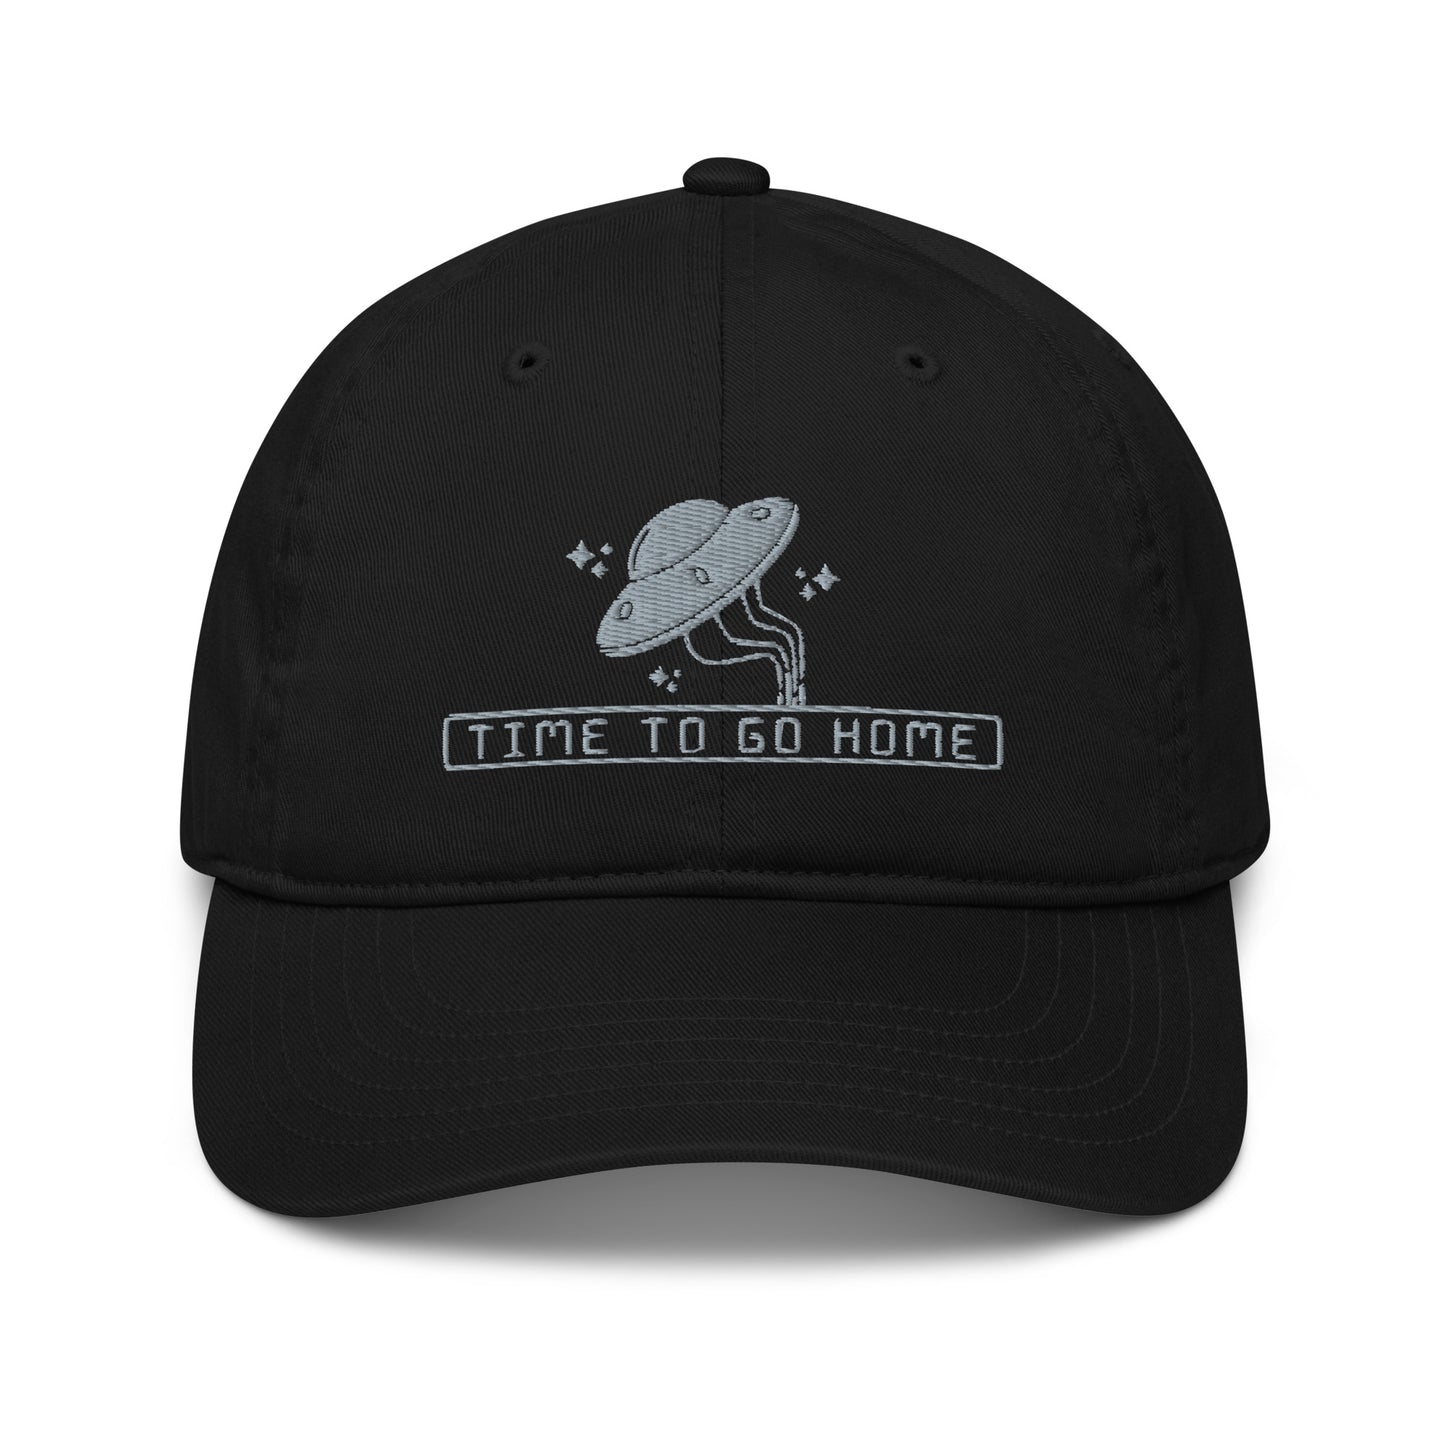 Organic "Time to go Home" Spaceship Hat